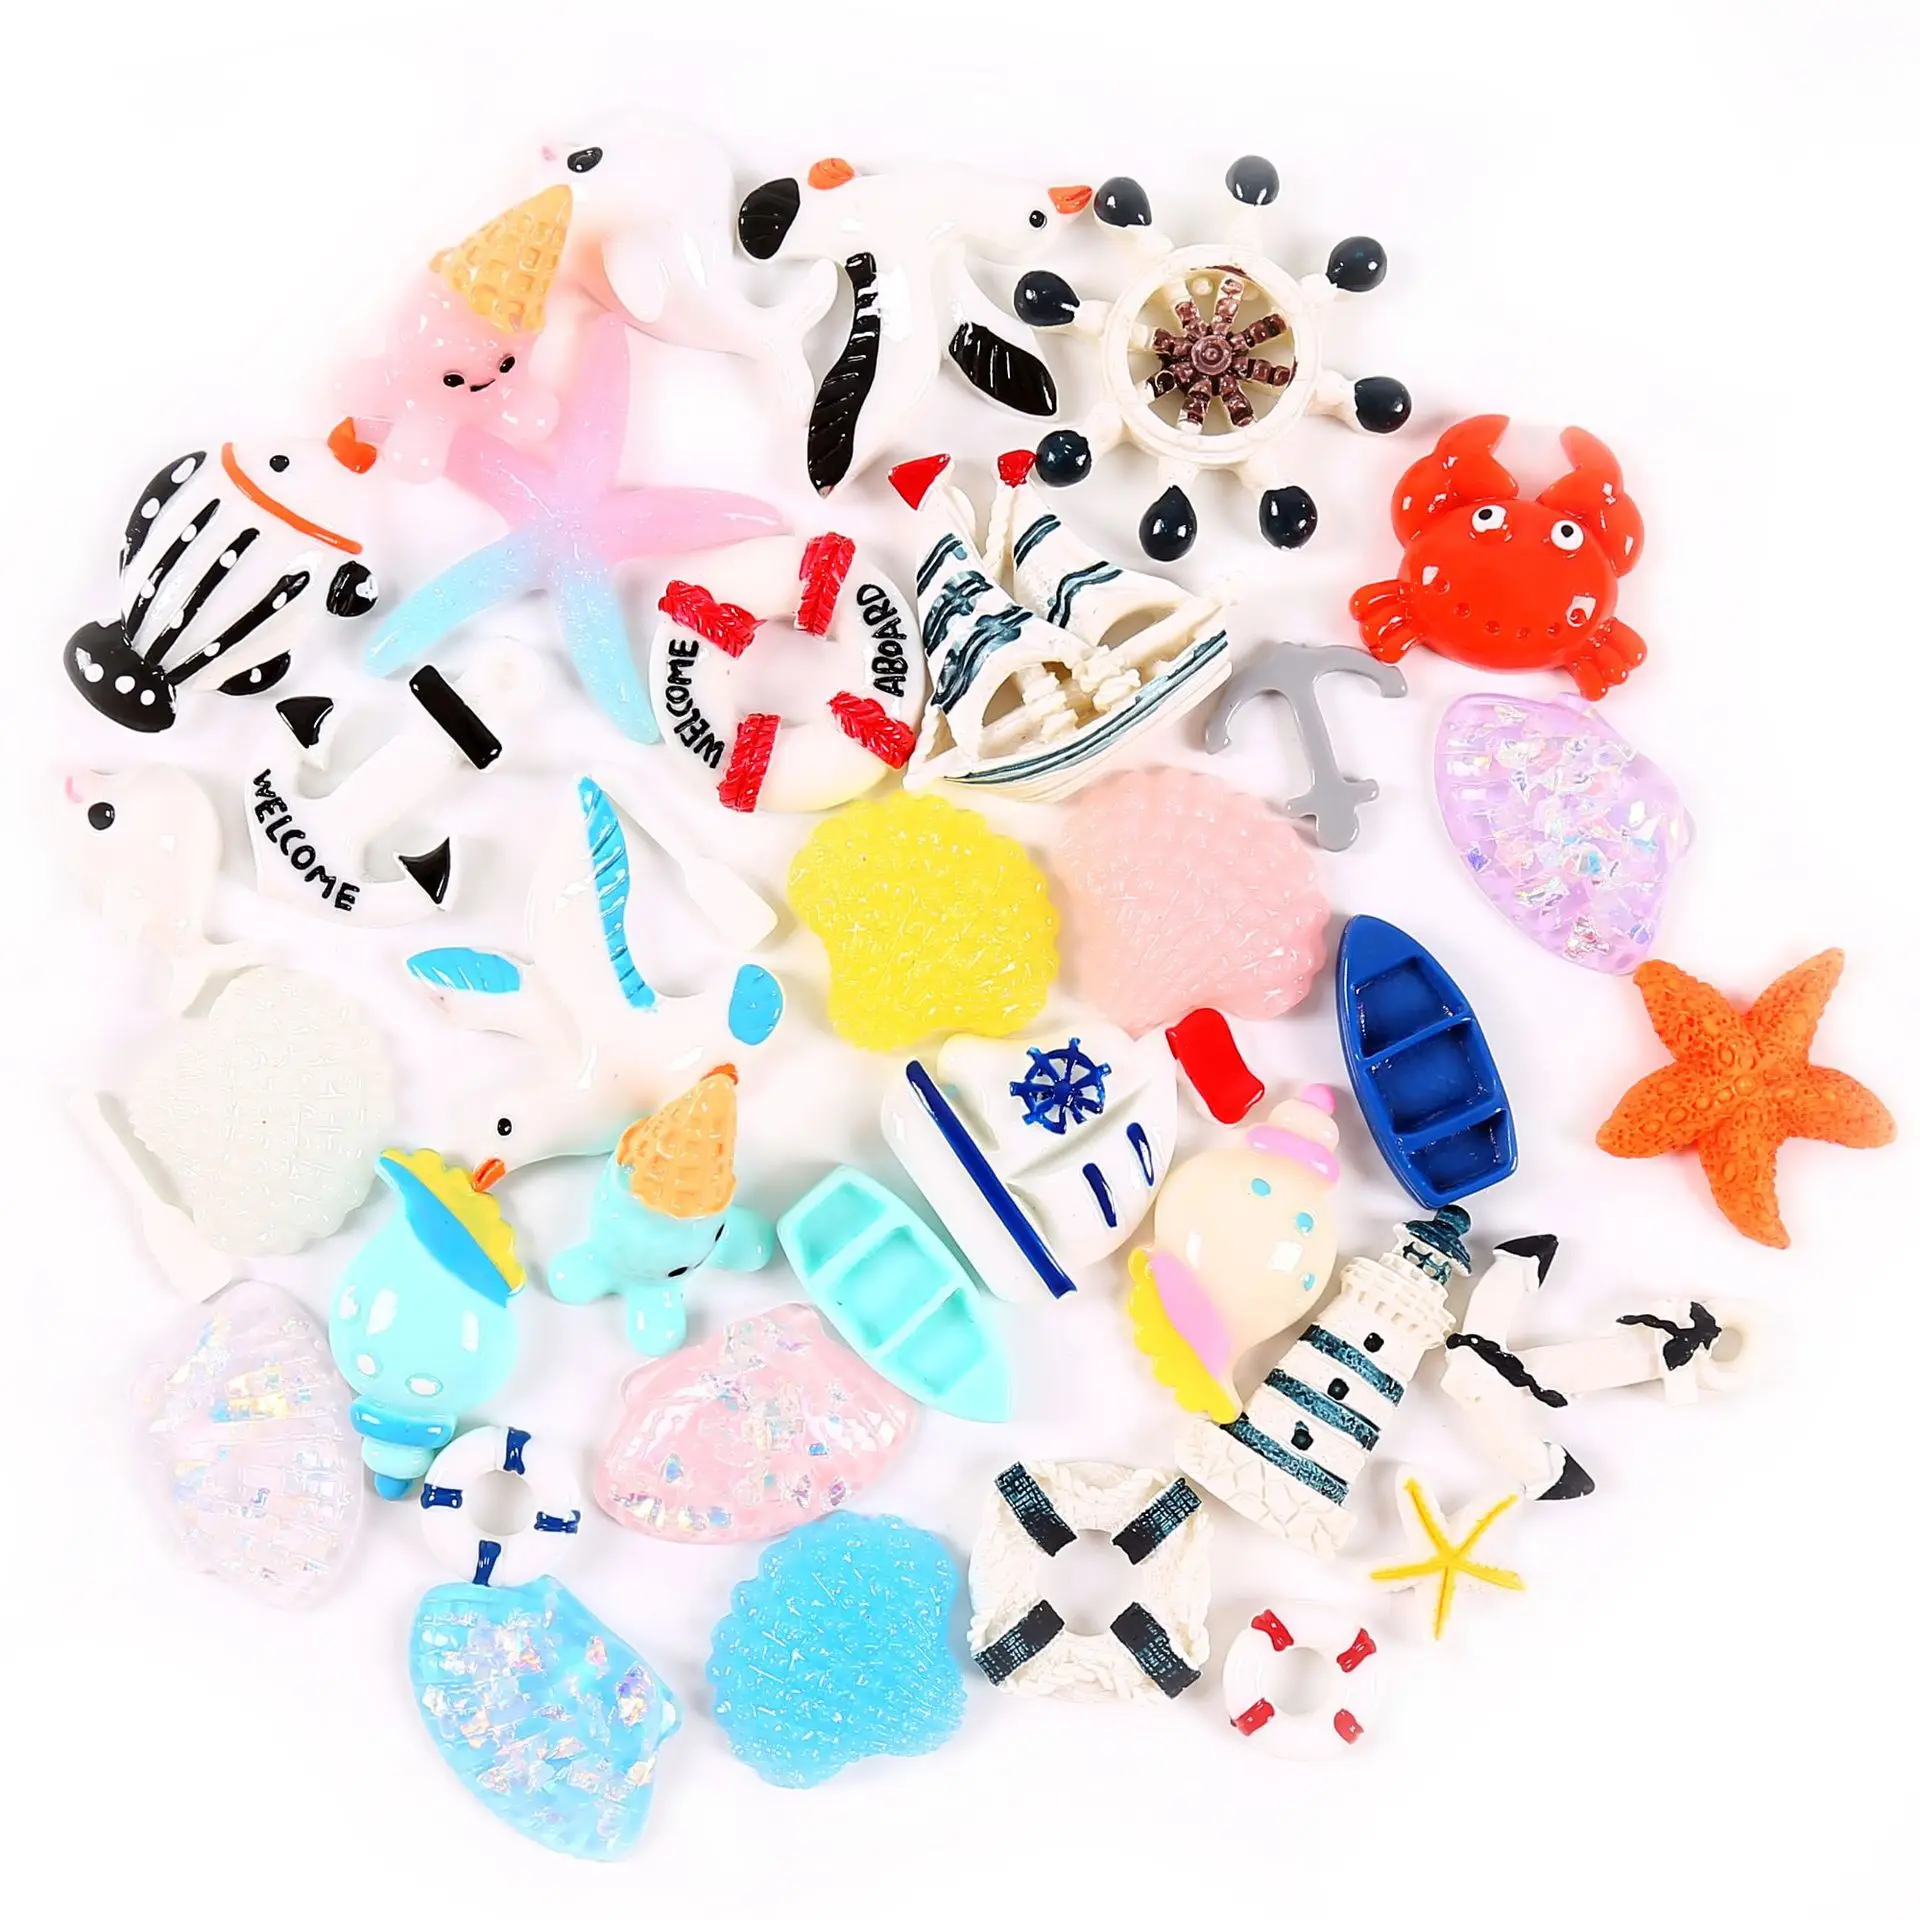 100pcs Ocean Series Charms For Slime Filler Diy Ornament Phone Decoration  Mermaid Charms Clay Slime Supplies Toys - Modeling Clay/slime - AliExpress